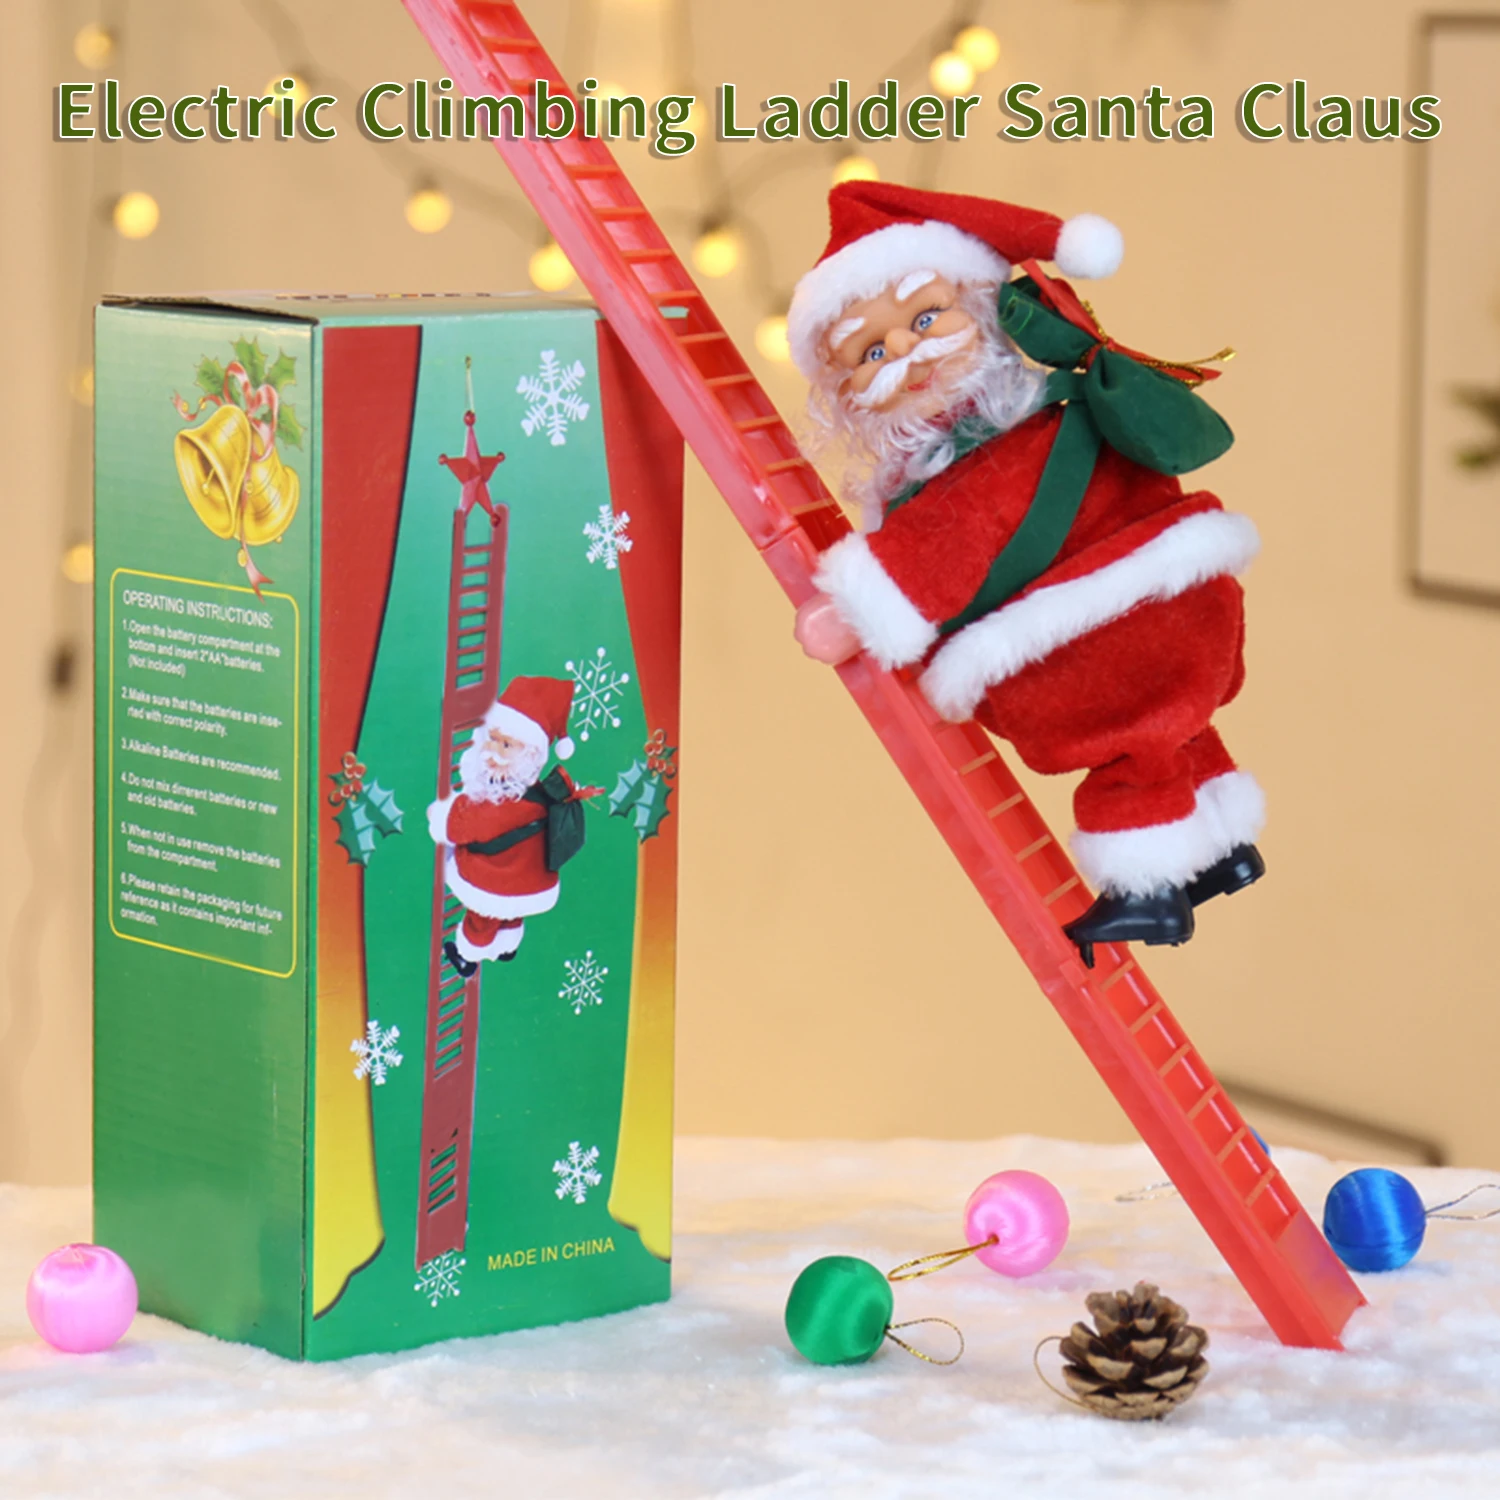 

2022 New Christmas Ornaments Gift Electric Climbing Ladder Santa Claus Doll Toys with Music Merry Christmas Tree Hanging Decor